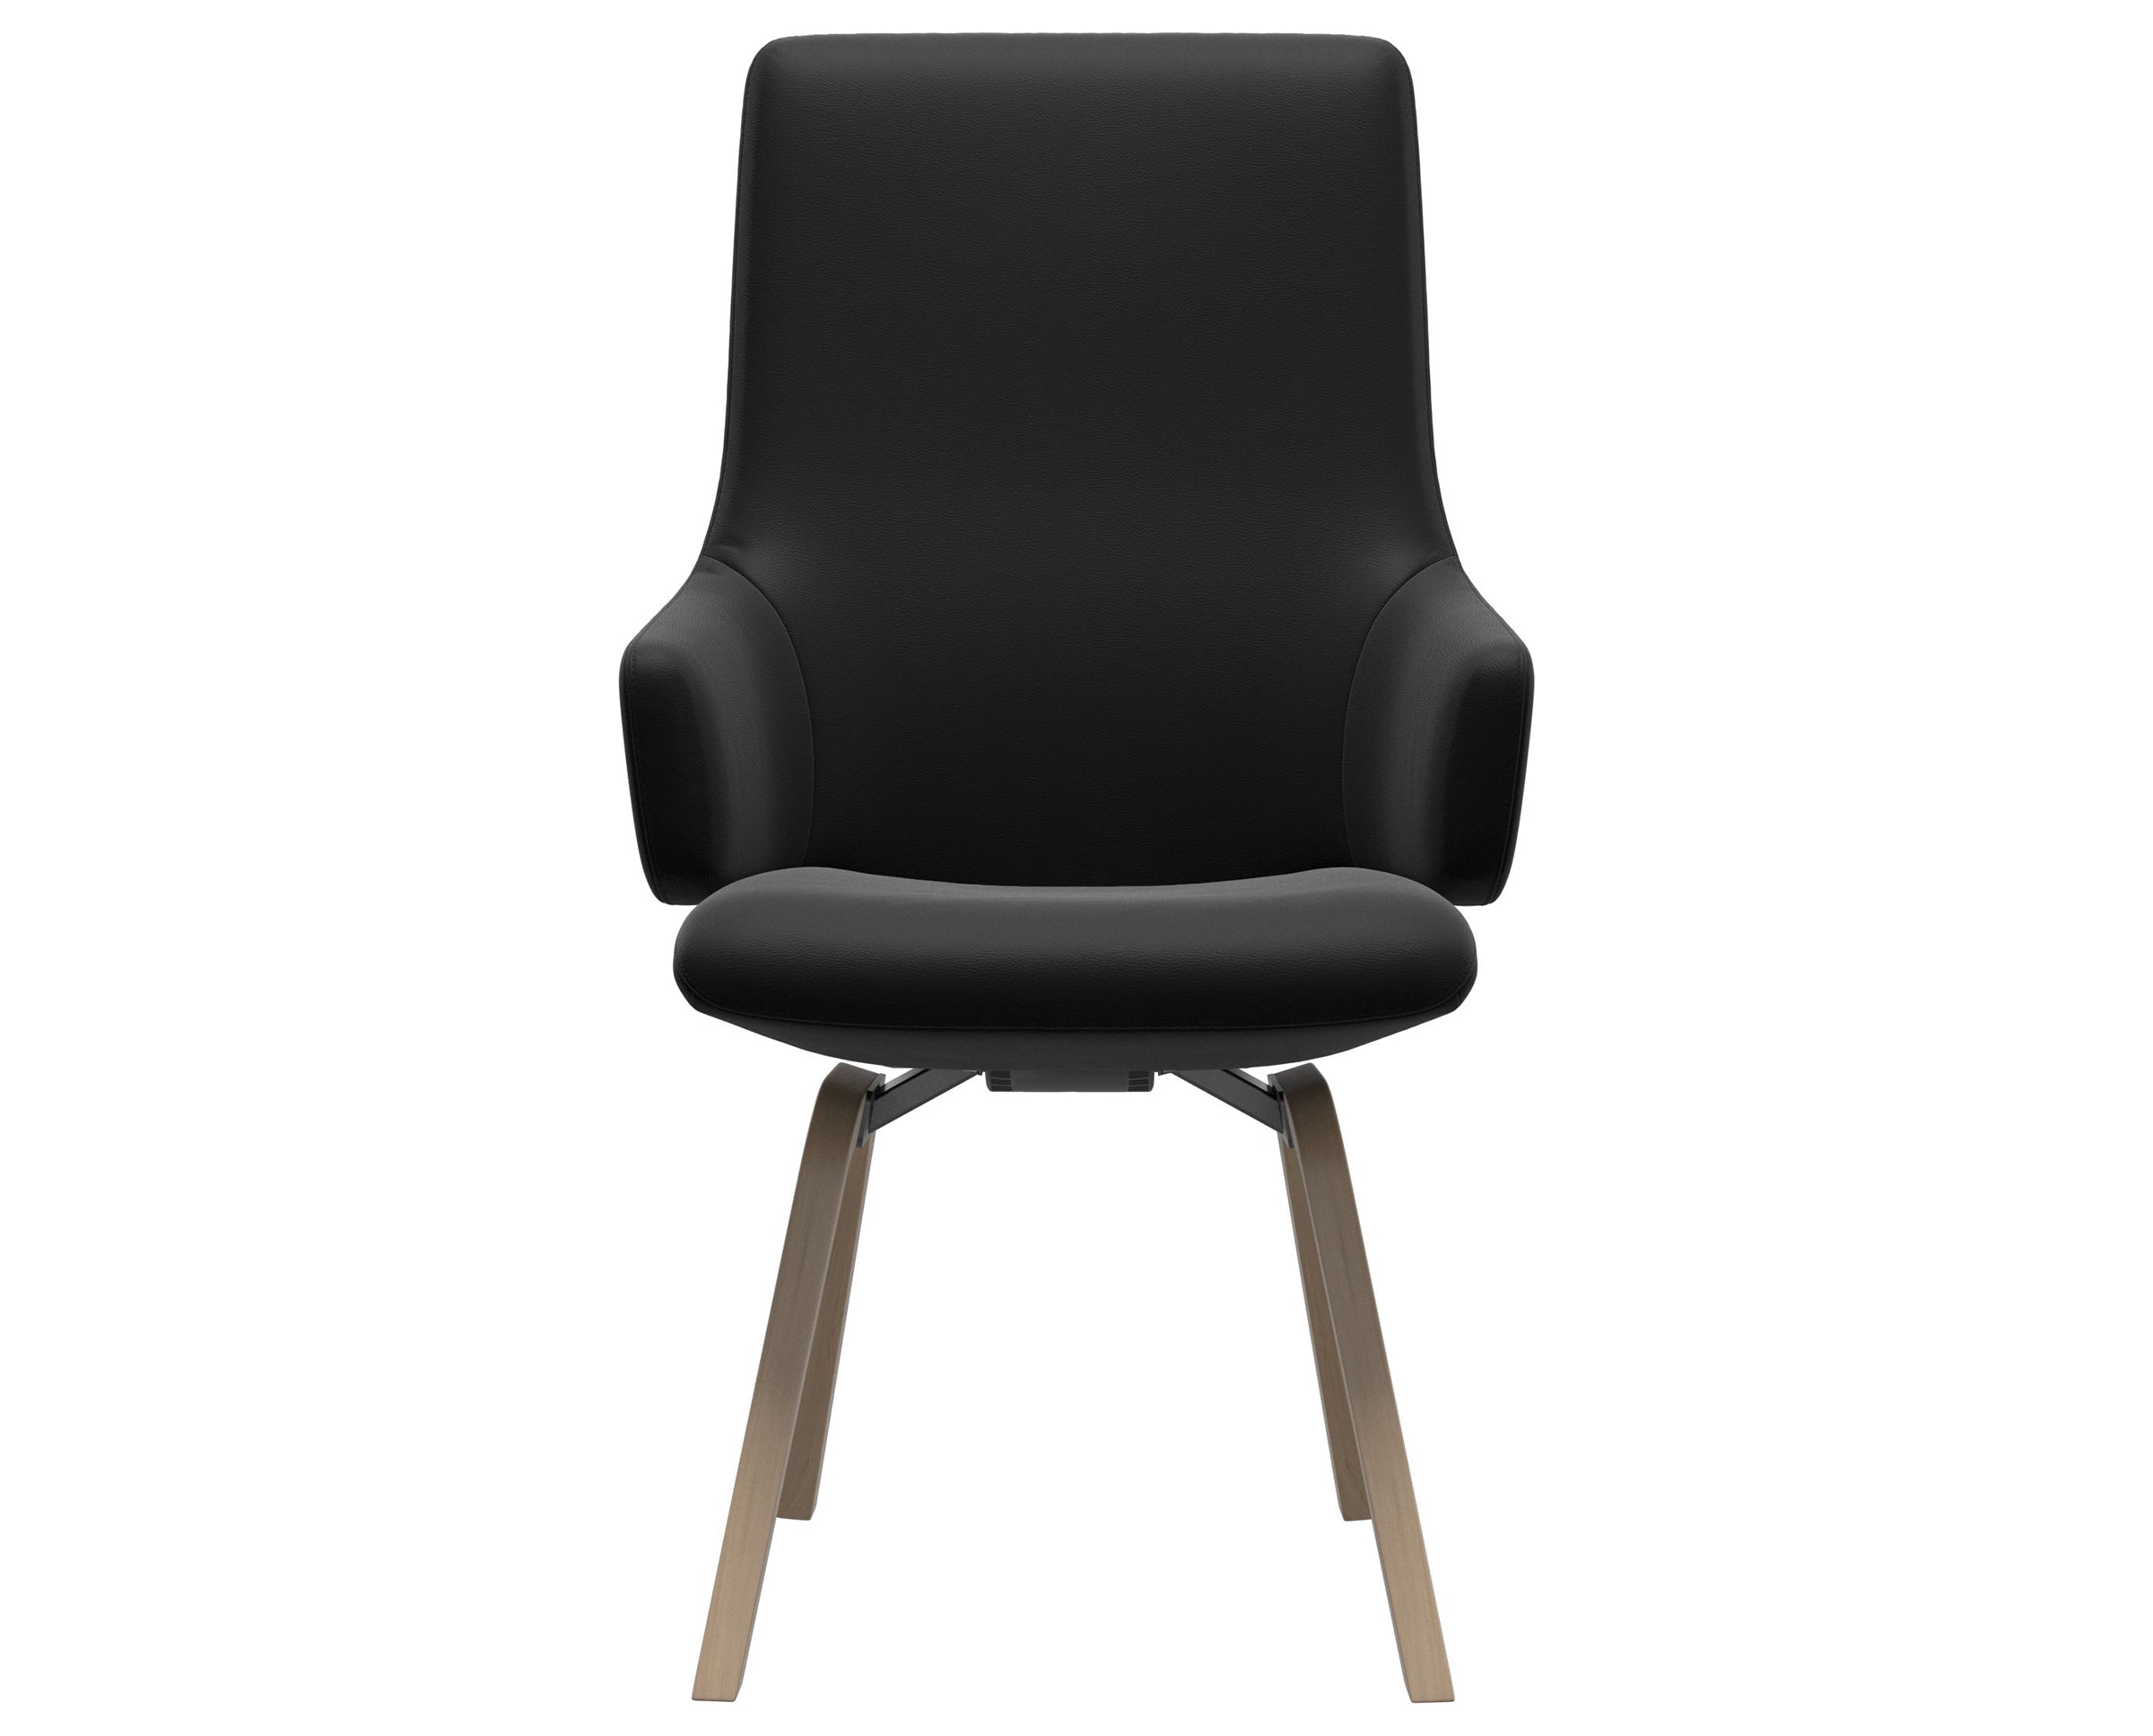 Paloma Leather Black and Natural Base | Stressless Laurel High Back D200 Dining Chair w/Arms | Valley Ridge Furniture